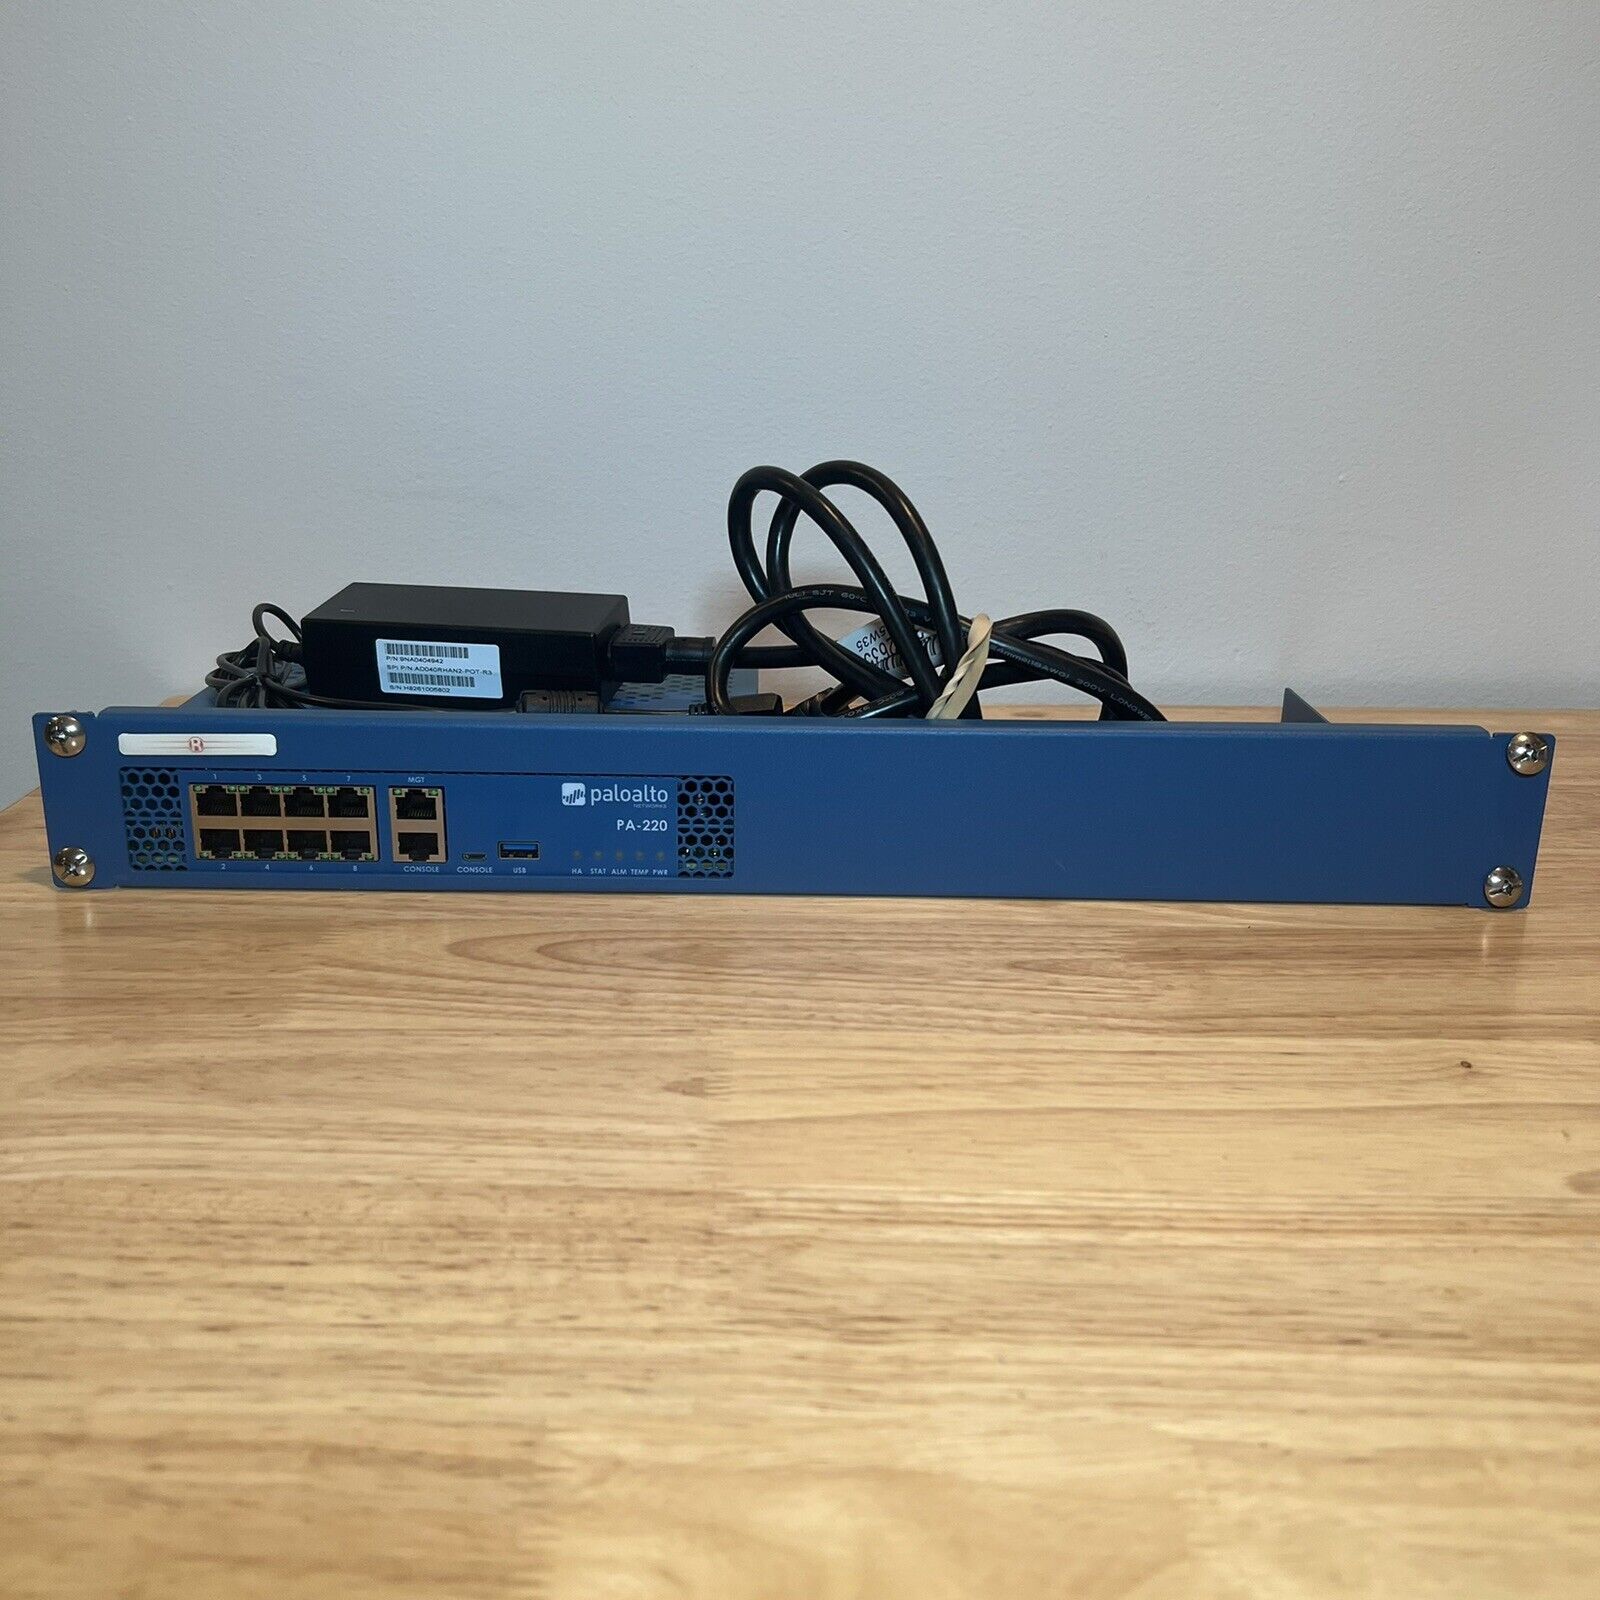 Palo Alto PA-220 Network Security Appliance Firewall With Rack Mount